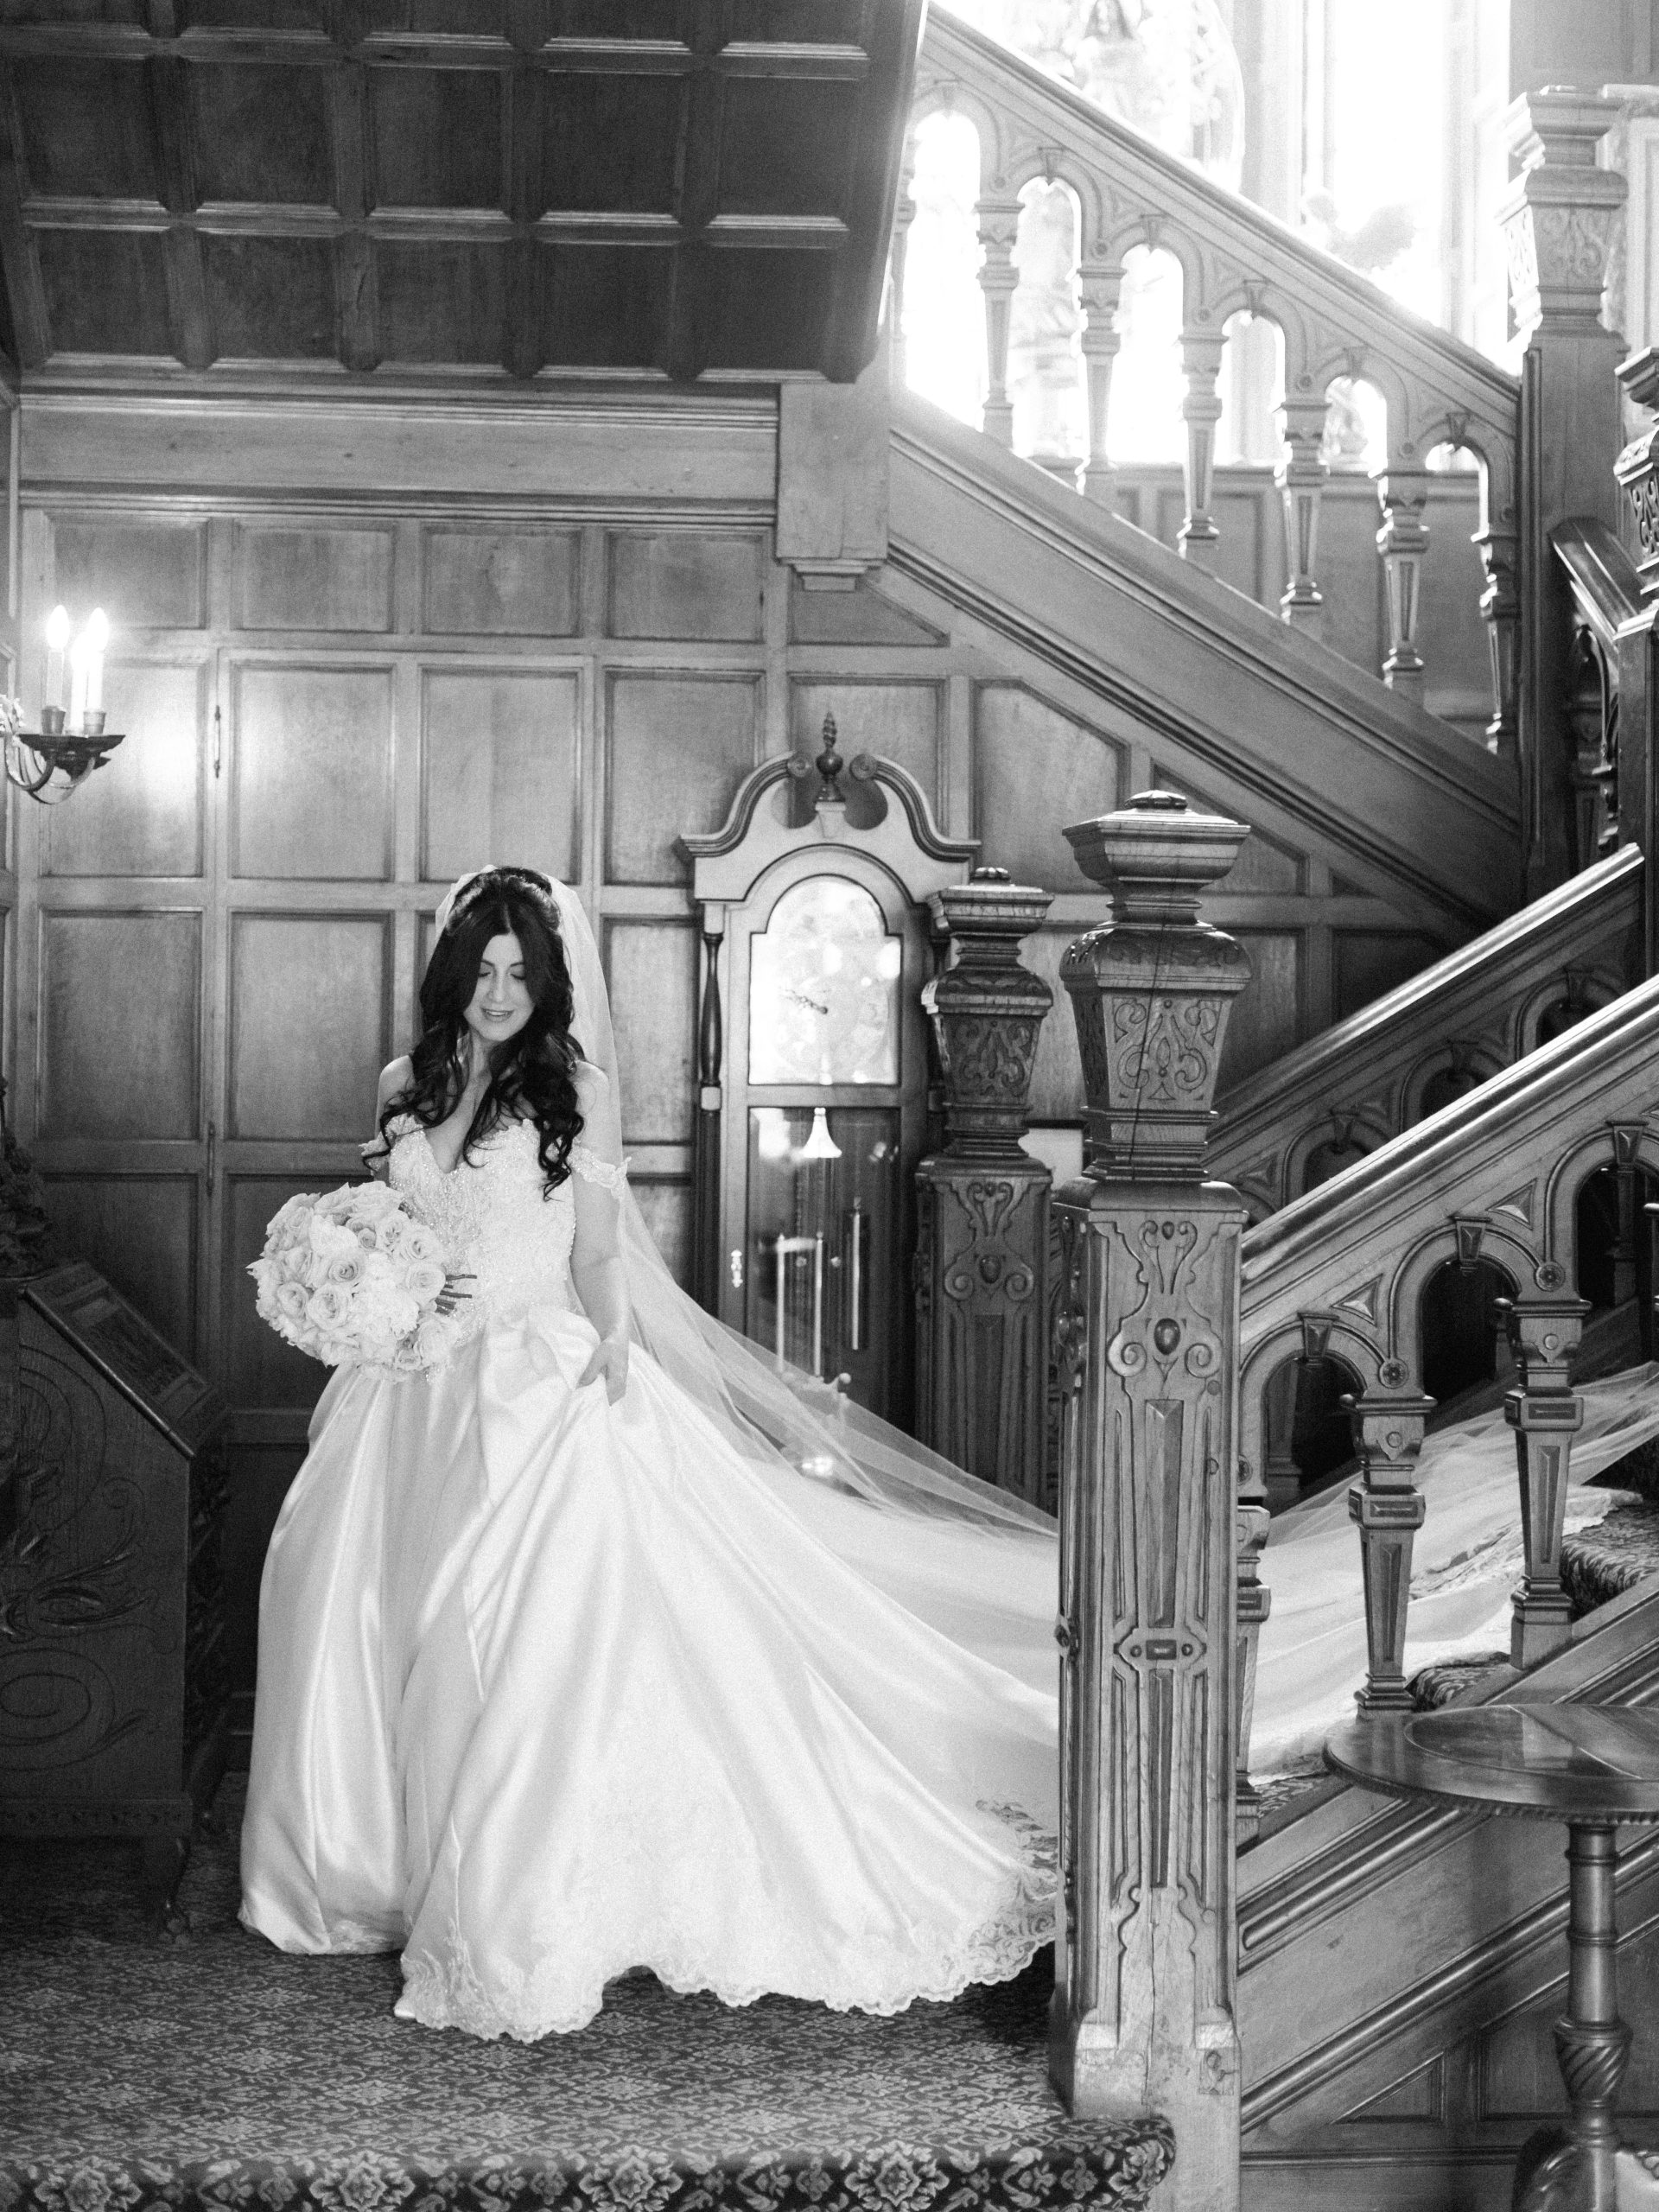 Bride Wearing A Ballgown Called Kimora By Sottero And Midgley Descending Stairs